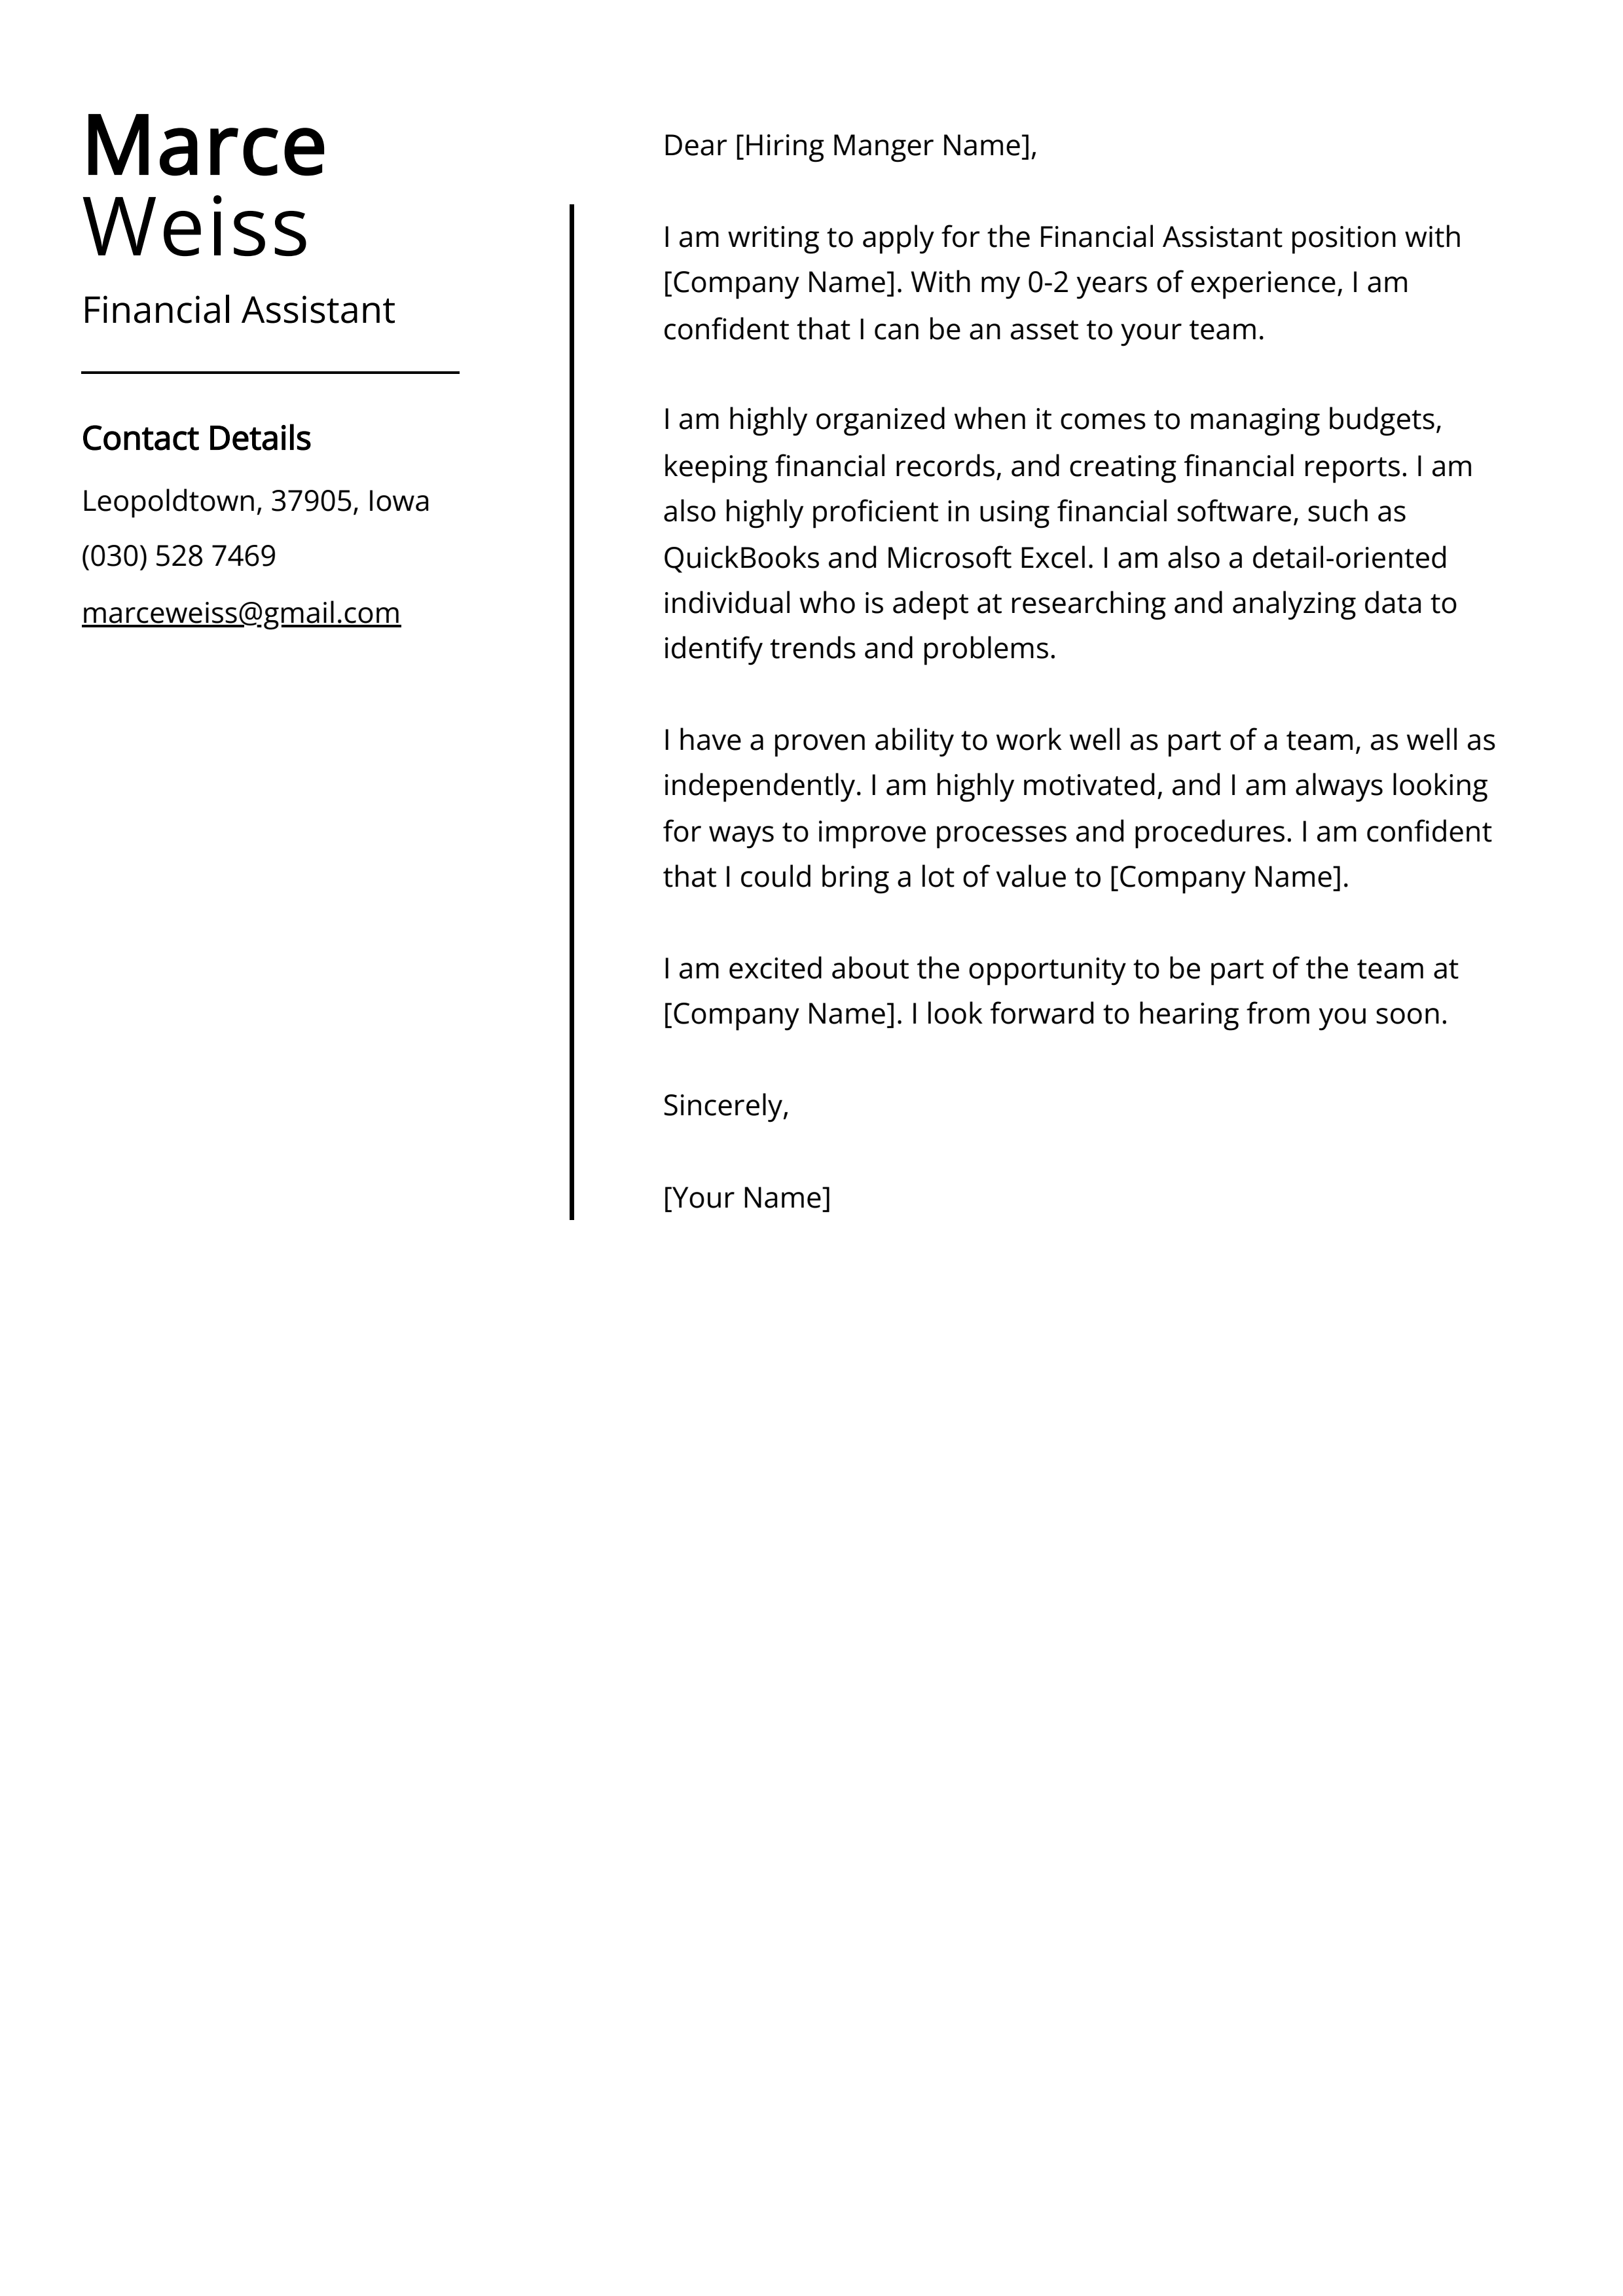 Financial Assistant Cover Letter Example